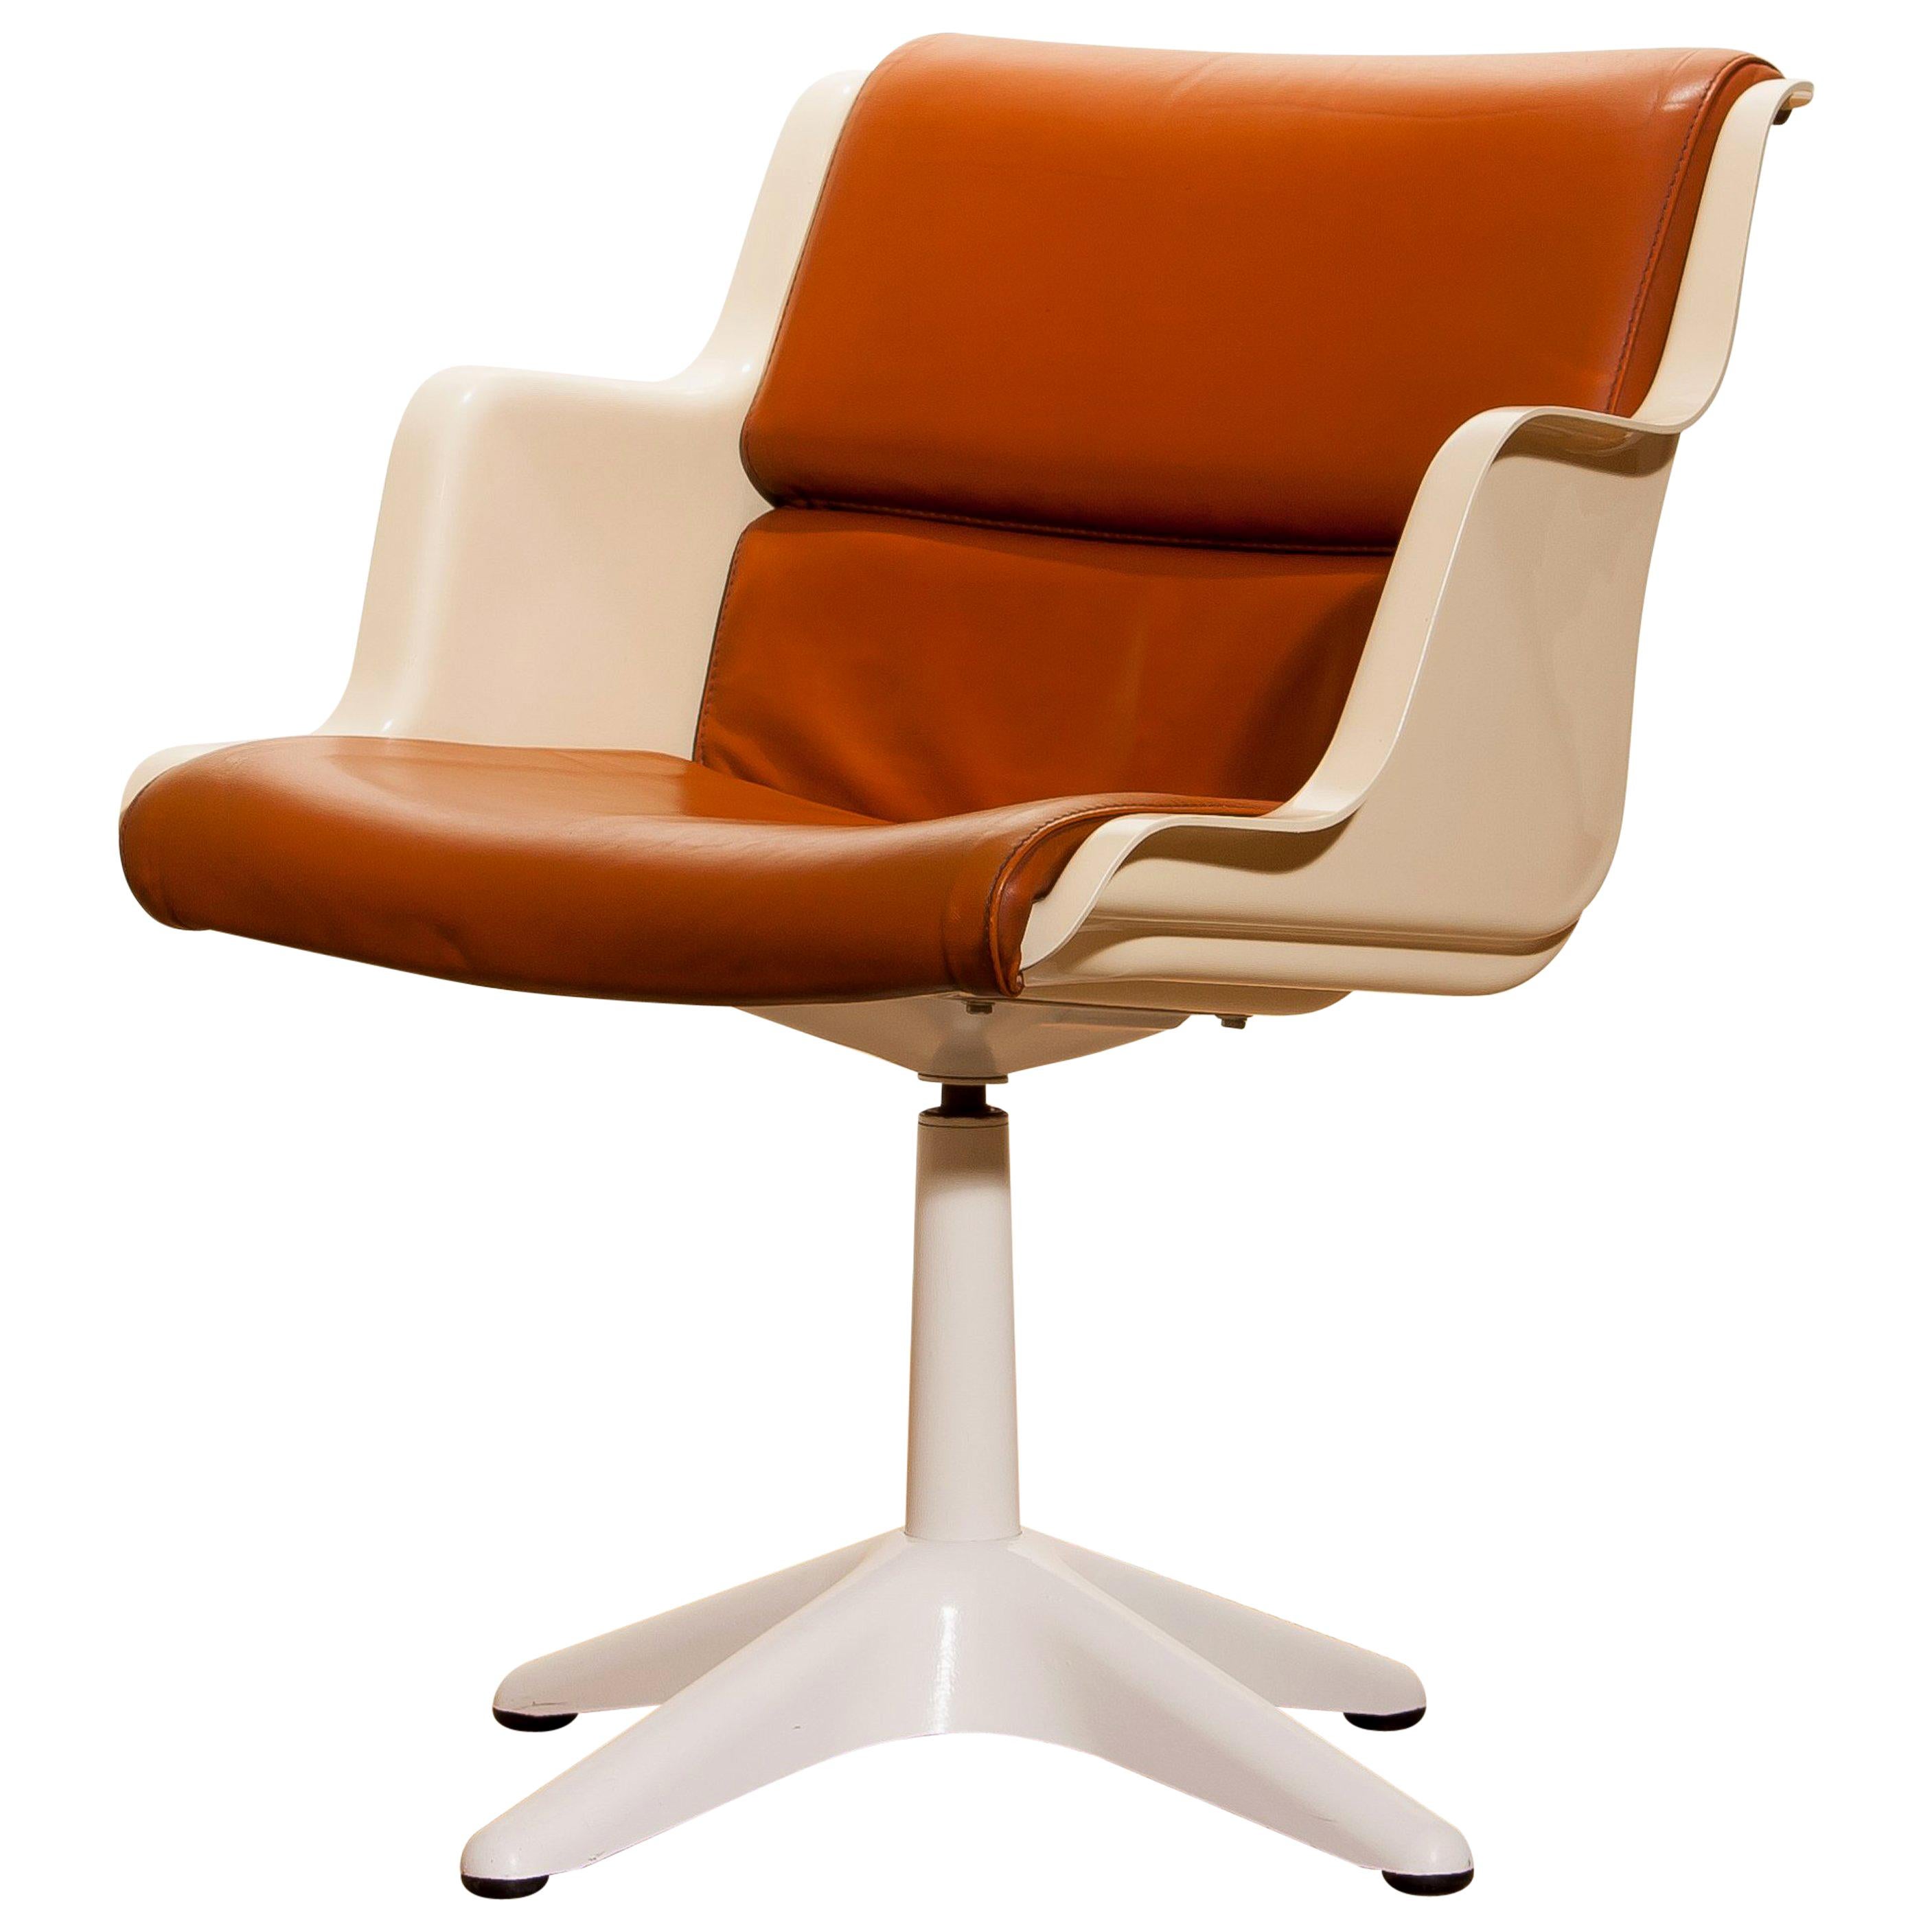 Beautiful desk chair designed by Yrjö Kukkapuro for Haimi, Finland.
This chair is made of a cognac leather seating in an off-white fibreglass shell on a white lacquered metal swivel Stand.
The chair is labelled.
It is in a very nice